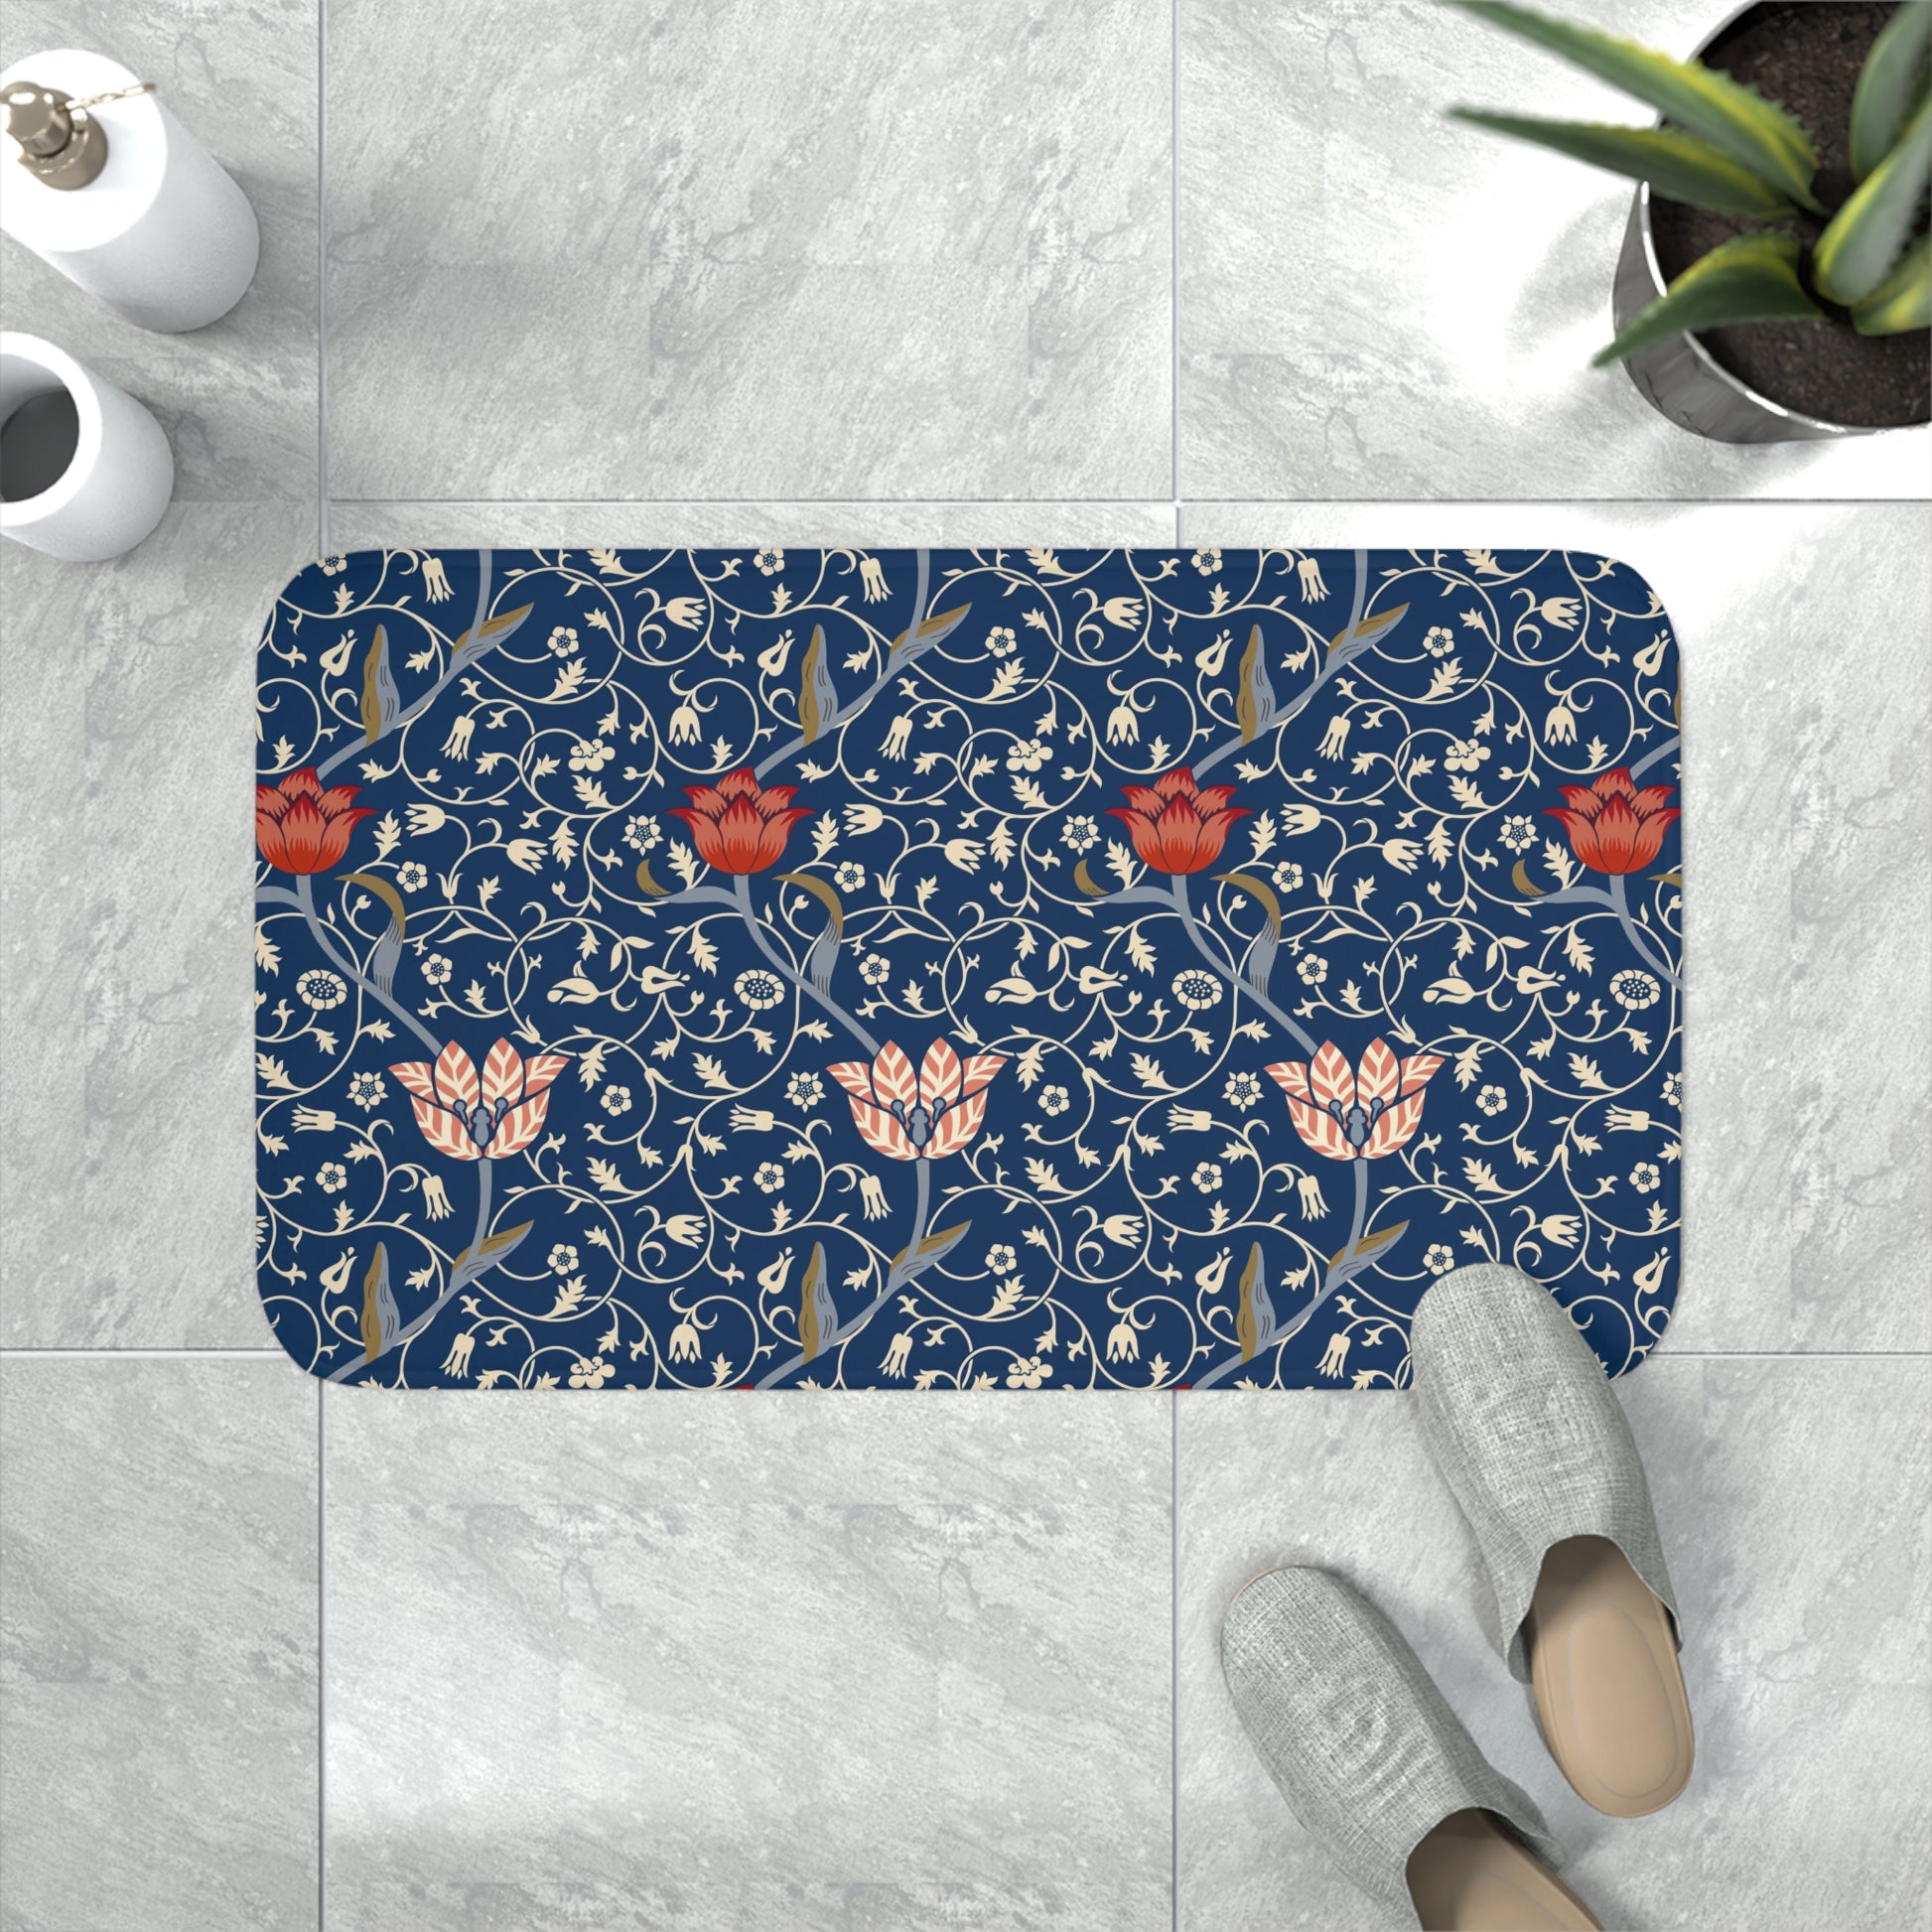 william-morris-amp-co-memory-foam-bath-mat-medway-collection-3